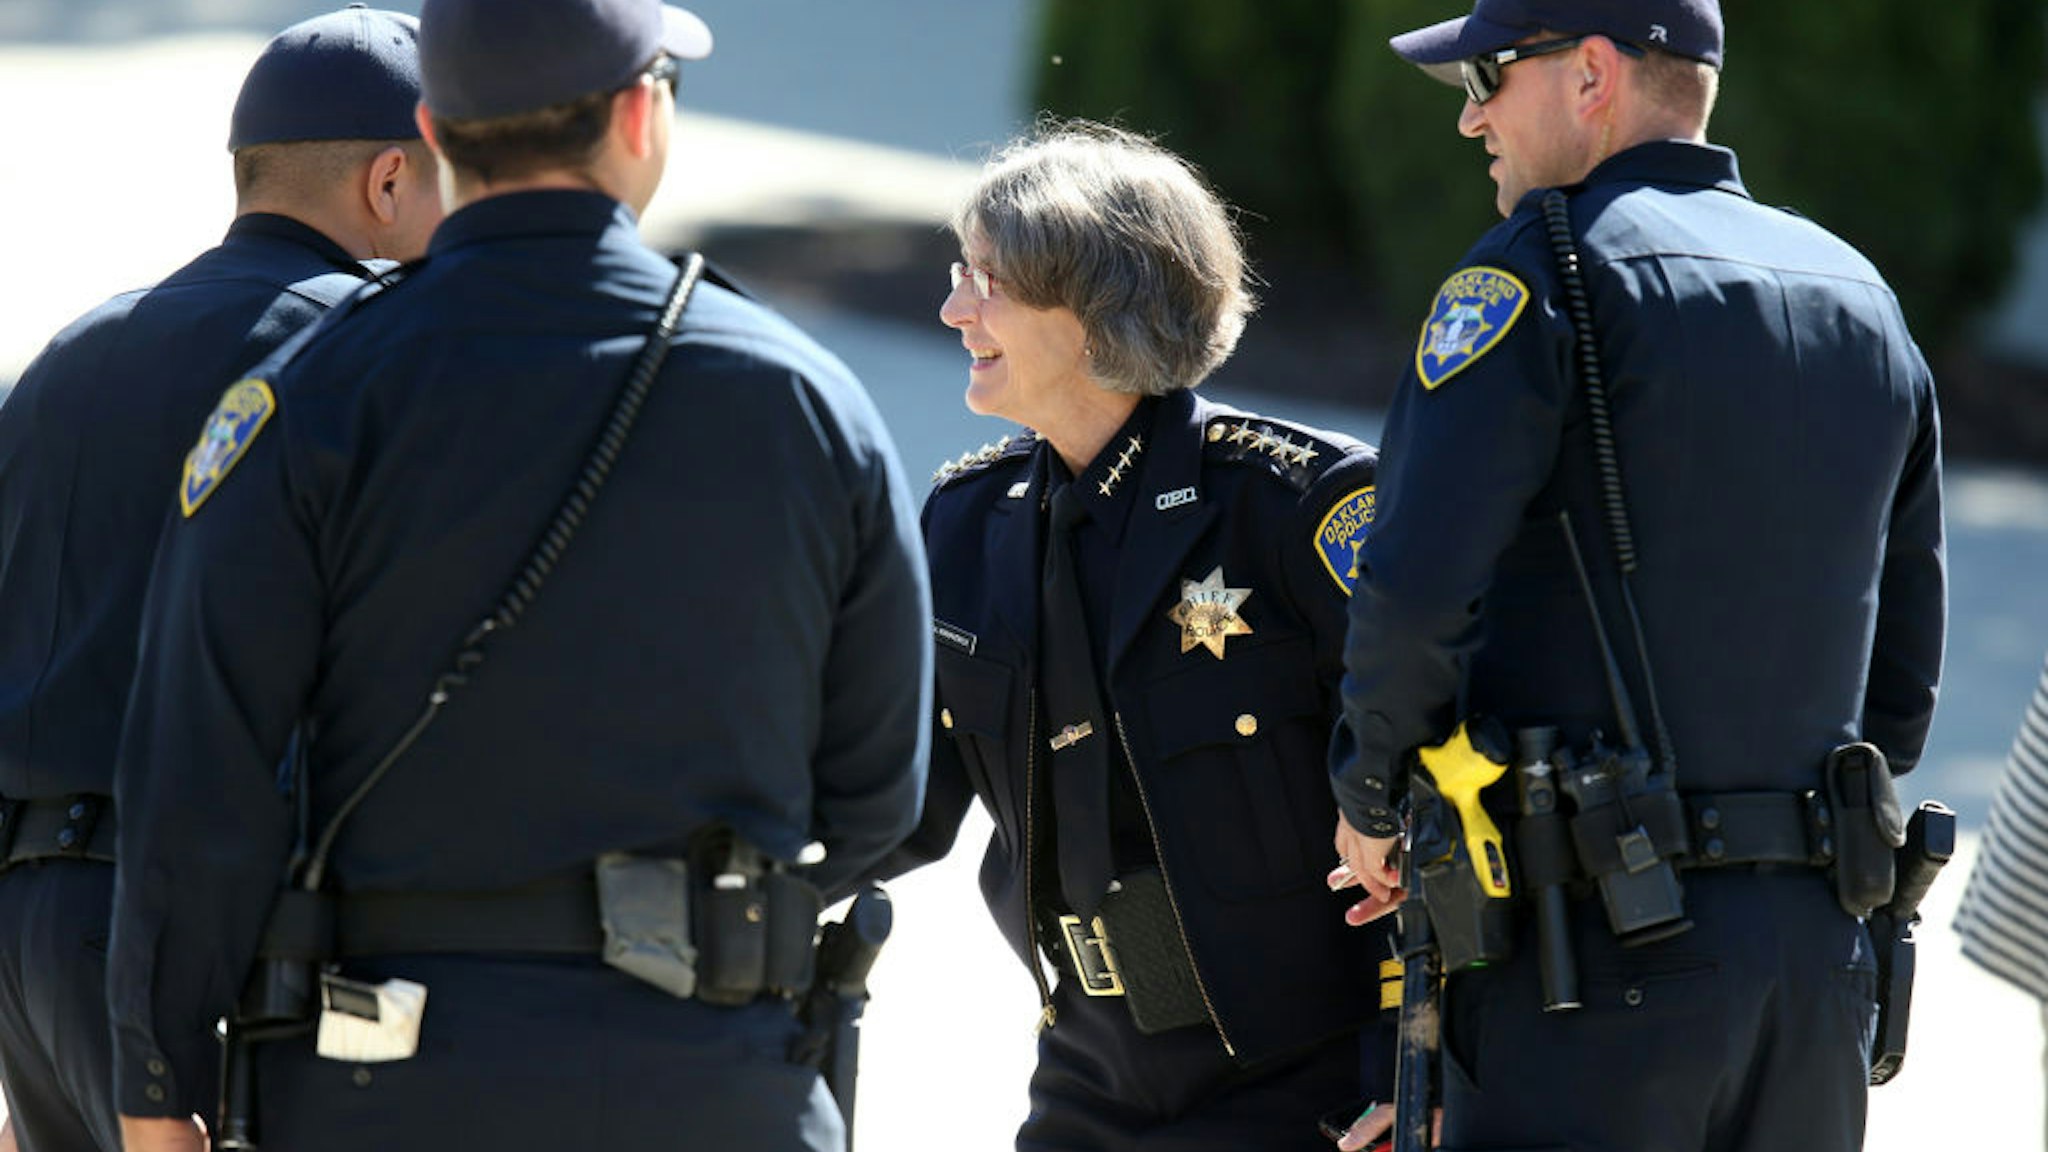 Oakland police Chief Anne Kirkpatrick greets officers as she arrives to the Ascension Greek Orthodox Cathedral of Oakland to attend a department promotion ceremony in Oakland, Calif., on Friday, July 14, 2017.